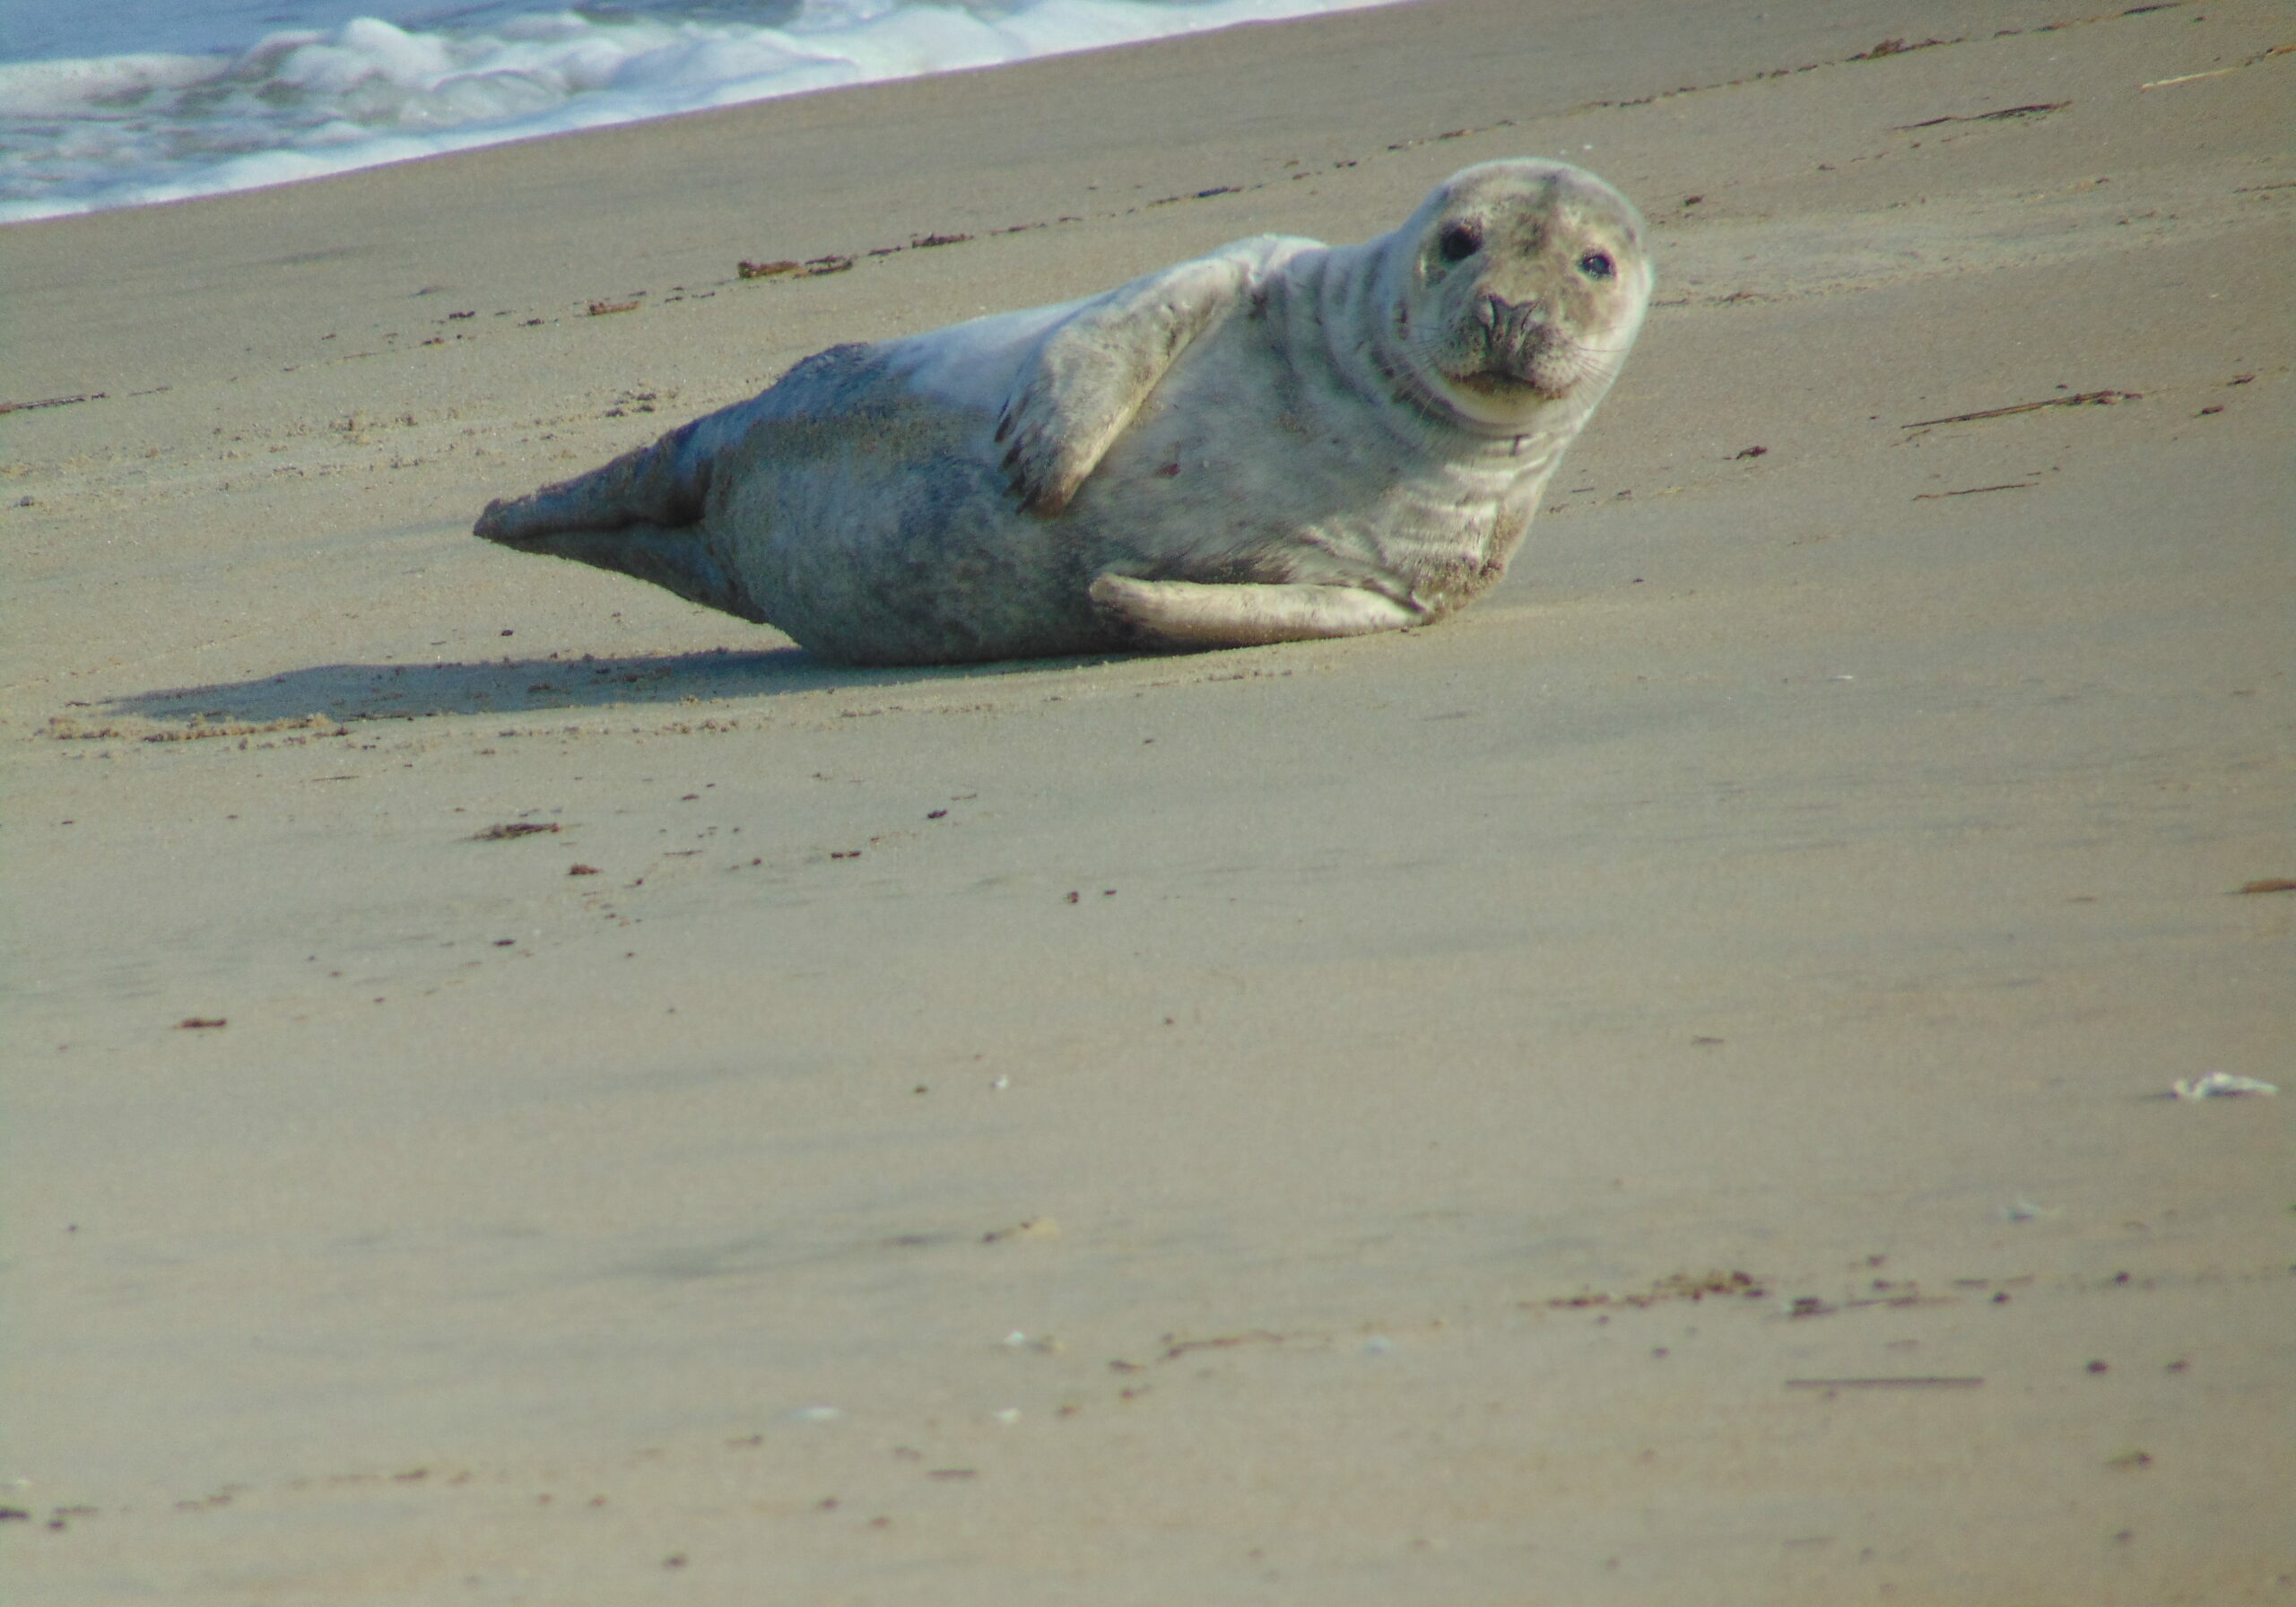 A male seal pup was rescued April 19th in the area of Gordon's Pond (photo courtesy of MERR Institute)